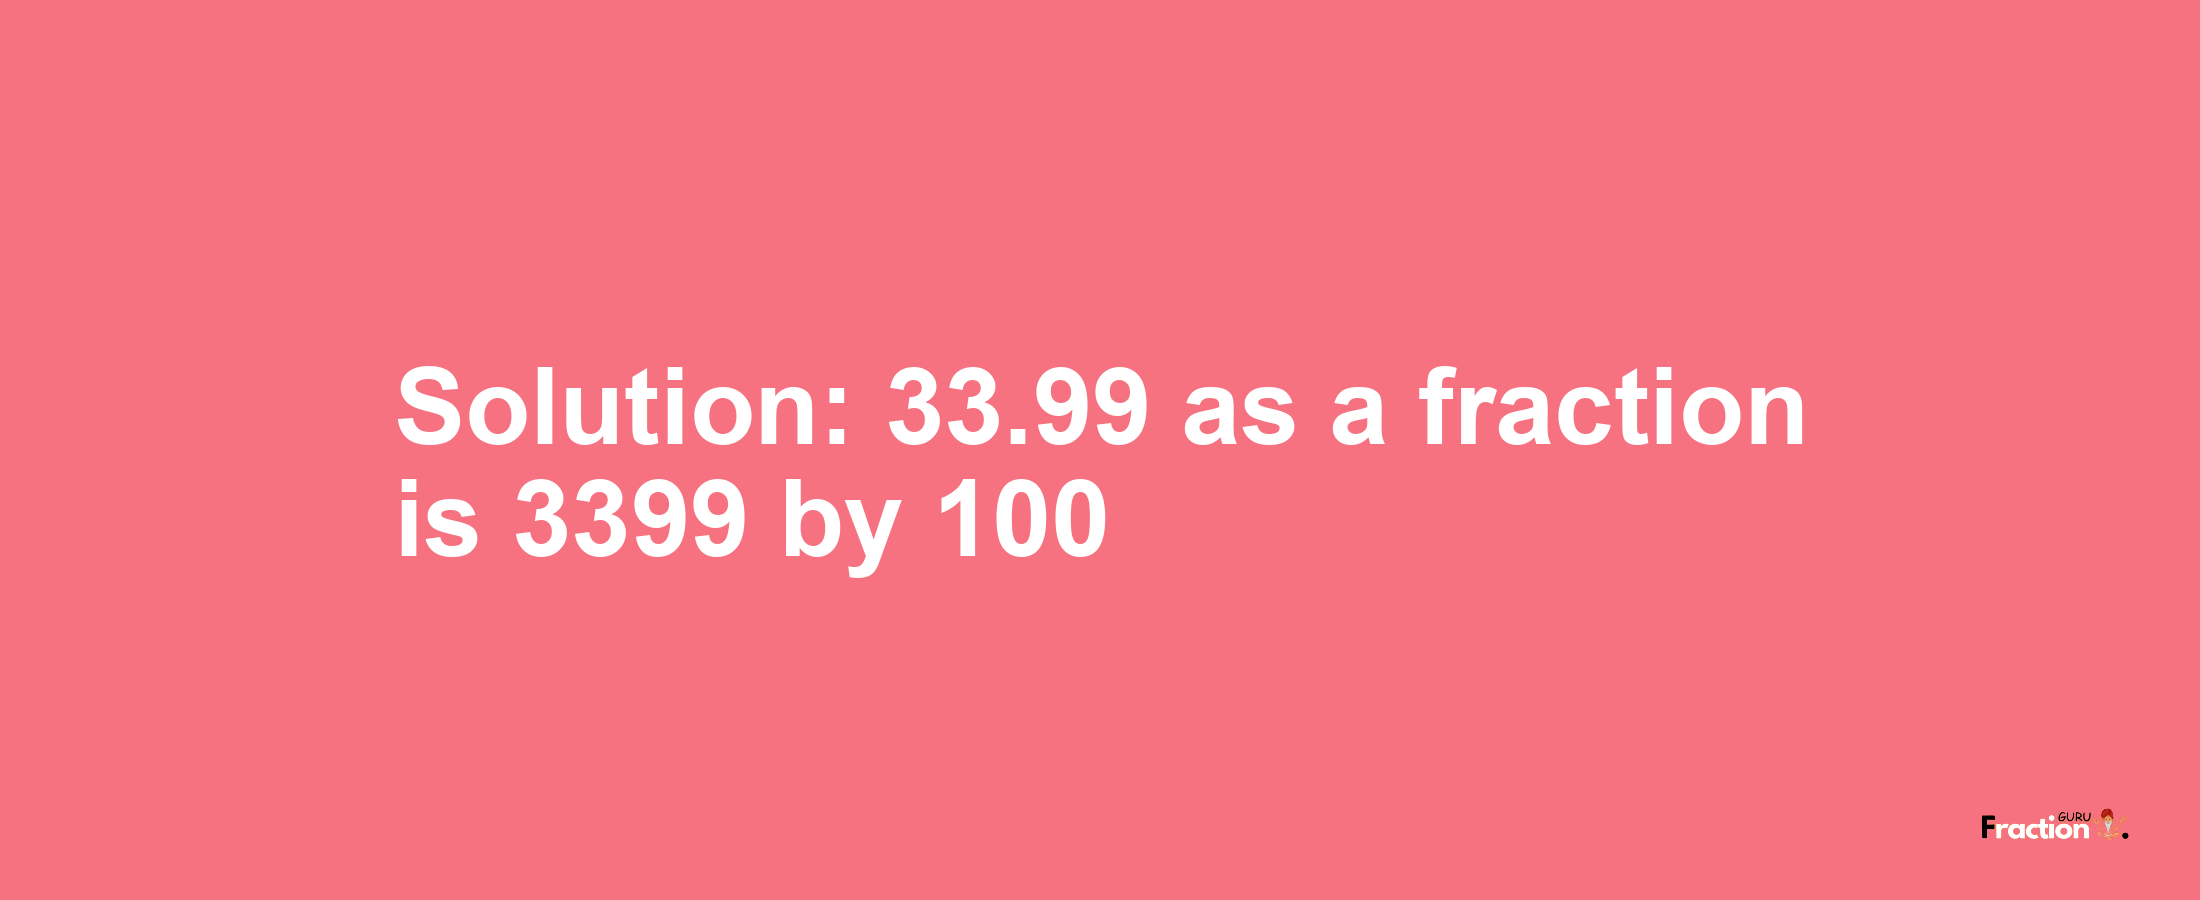 Solution:33.99 as a fraction is 3399/100